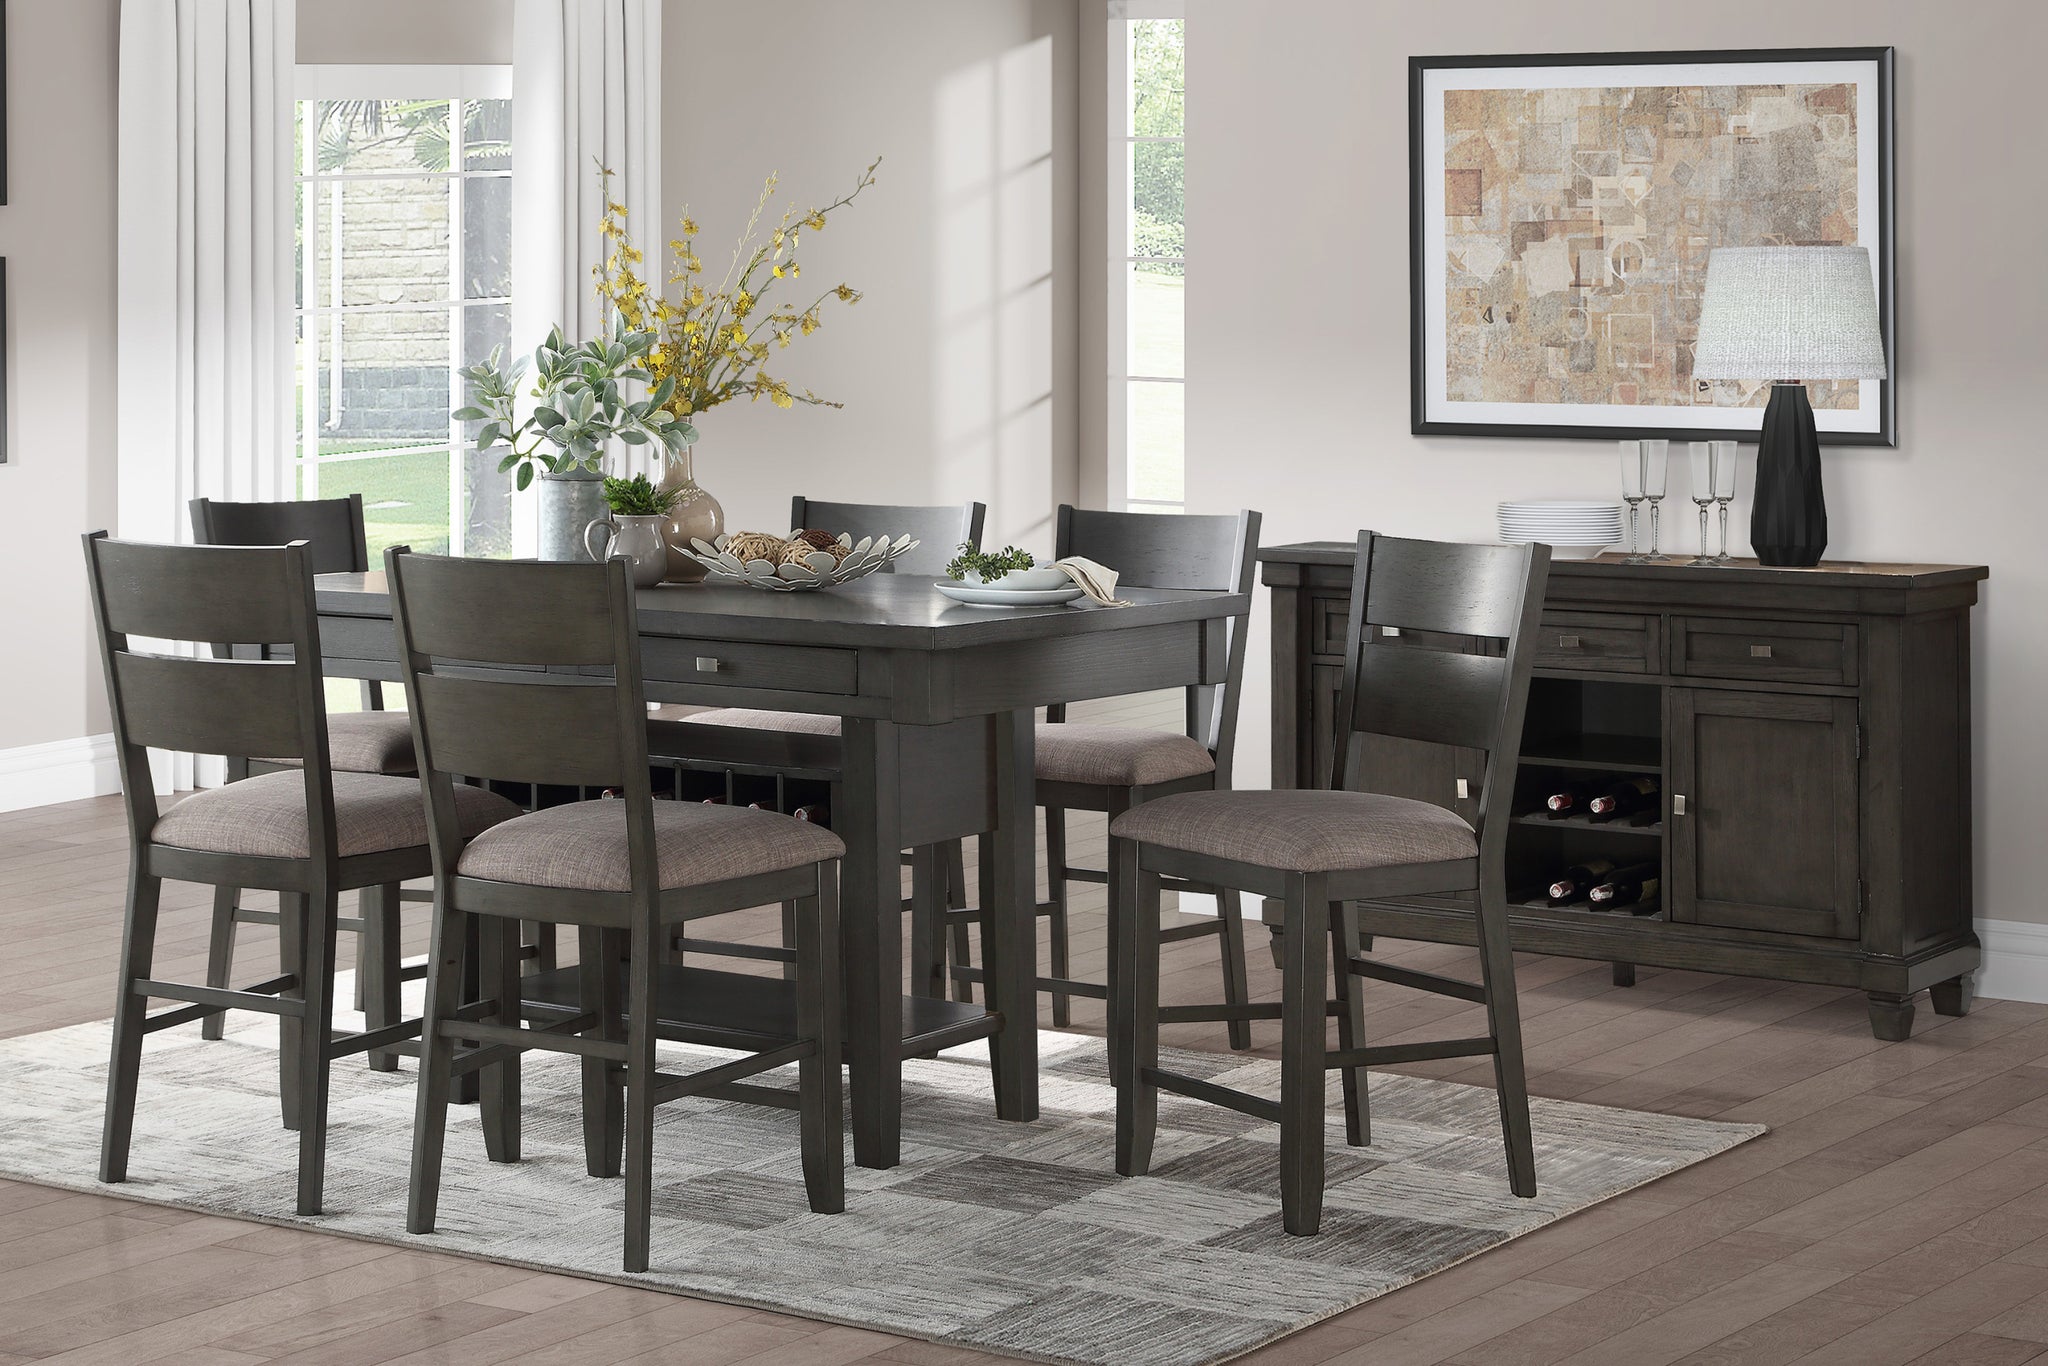 Counter Height 7pc Dining Set Gray Finish Dining Table wood-wood-gray-seats 6-wood-dining